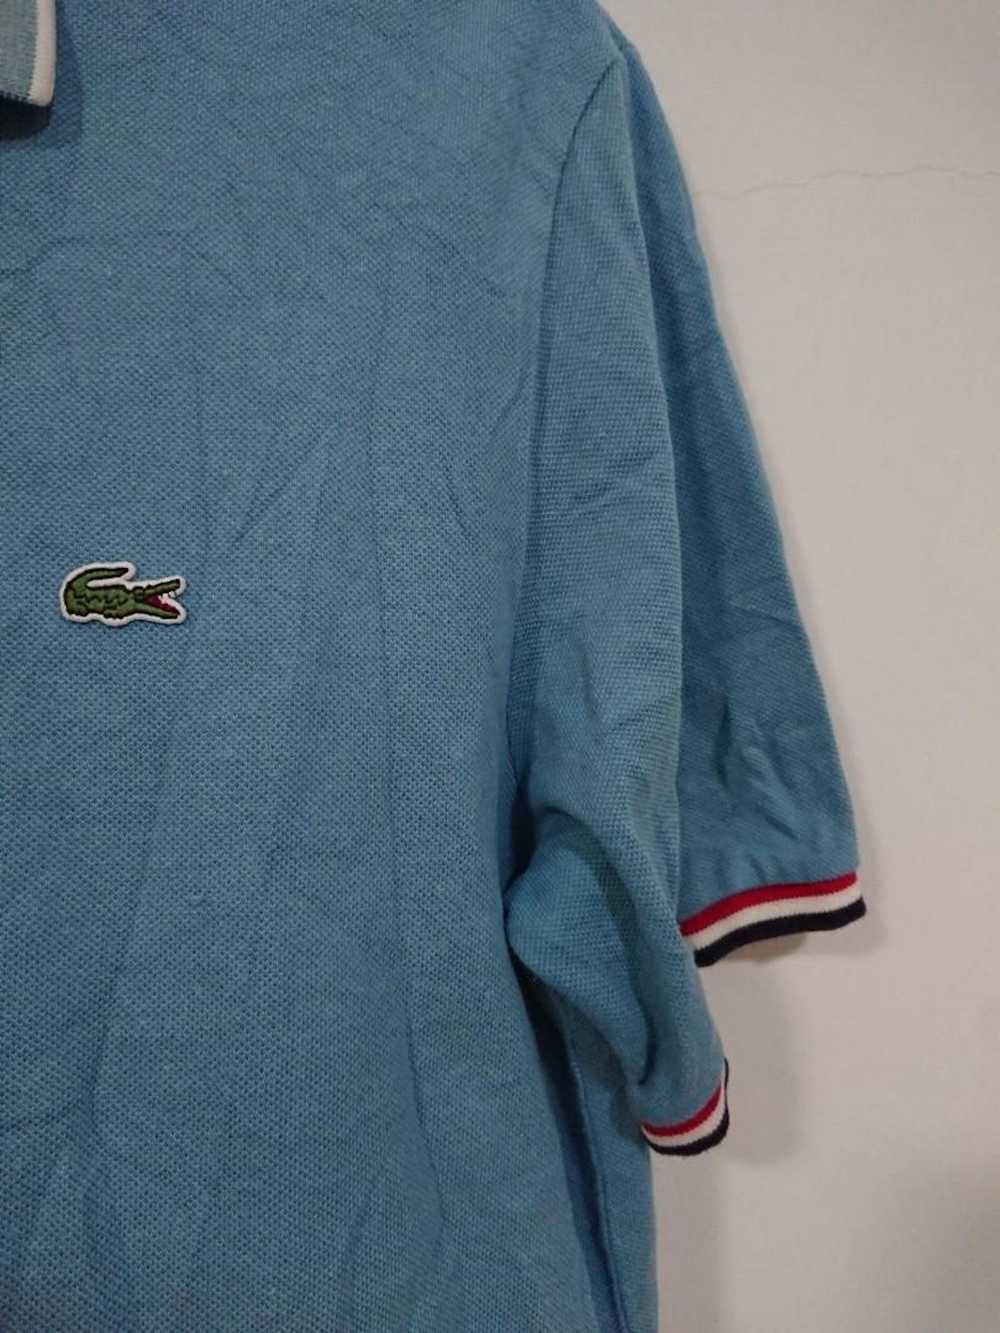 Lacoste Lacoste polos shirt size 4 - image 2